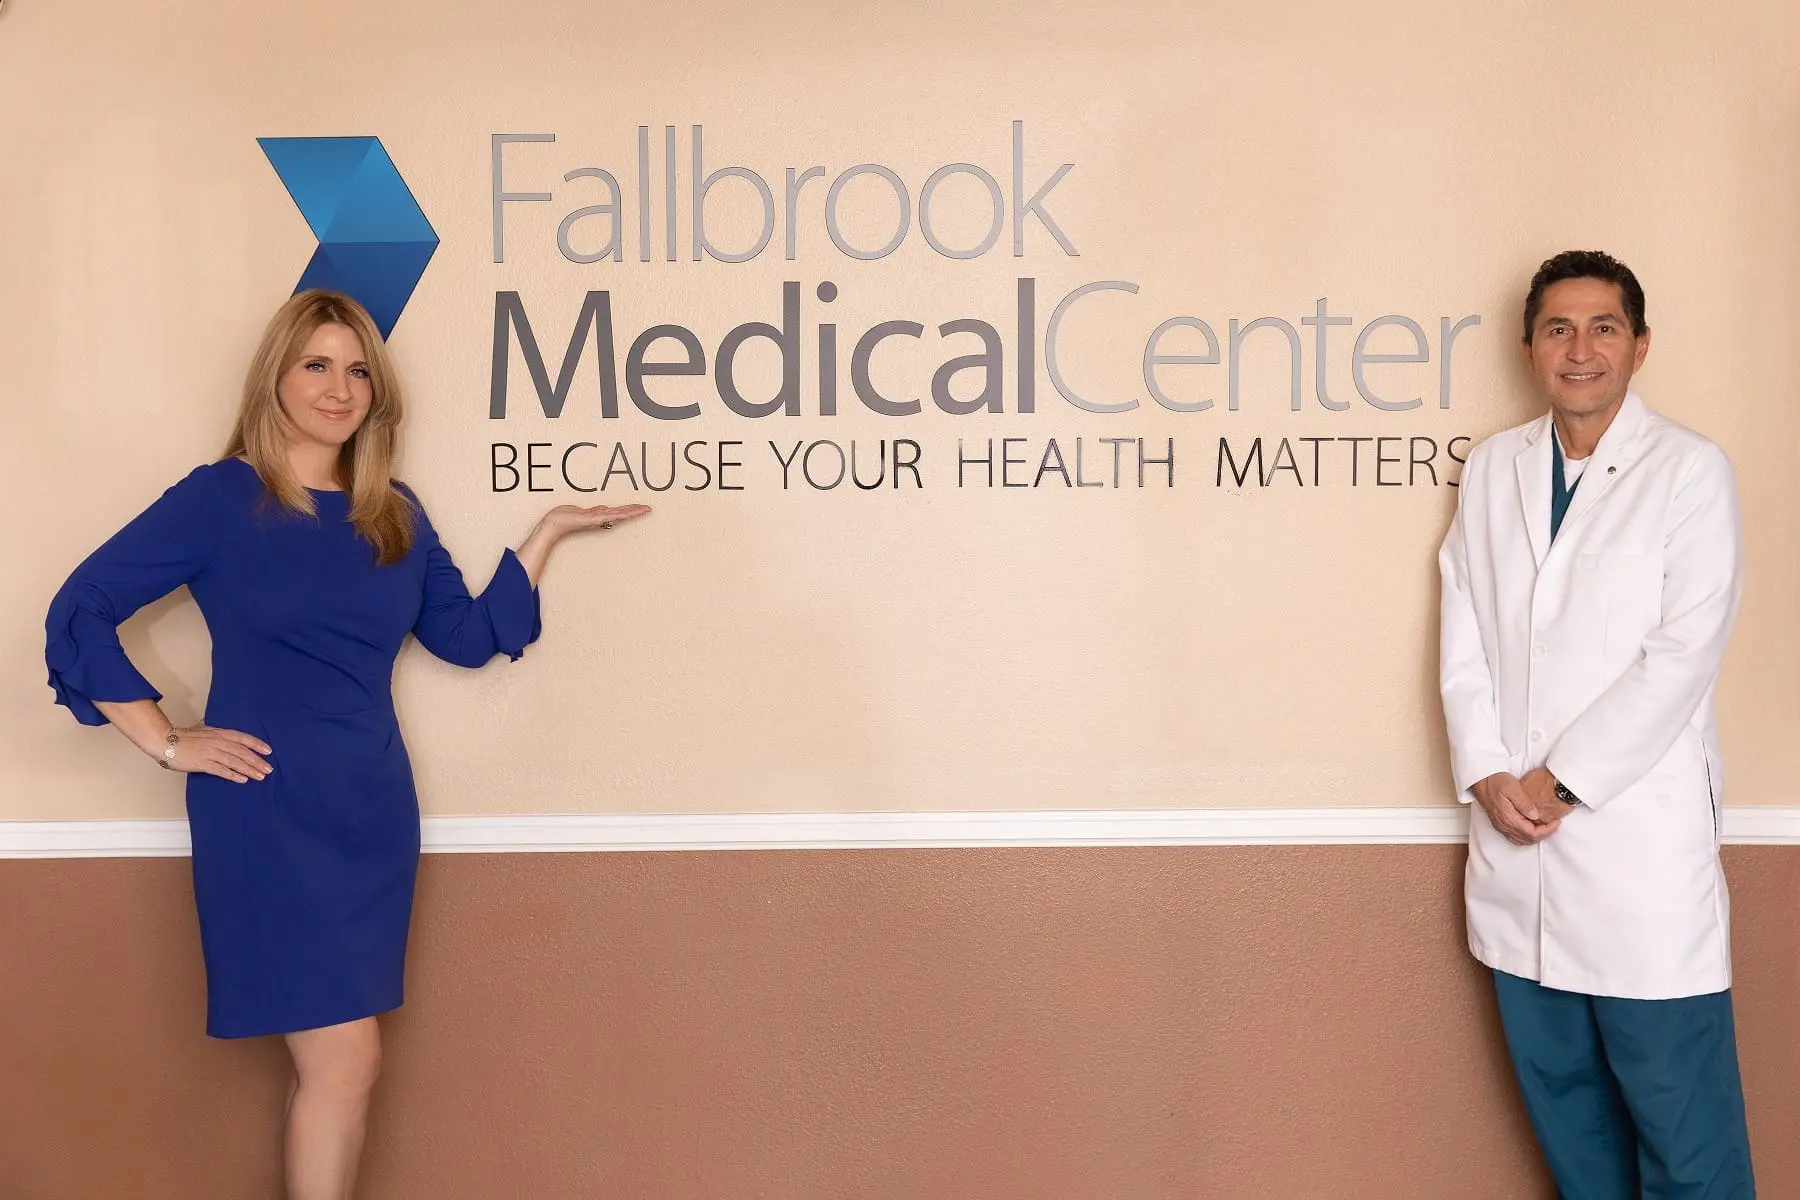 Medical Services Fall Brook Medical Center - Because Your Health Matters